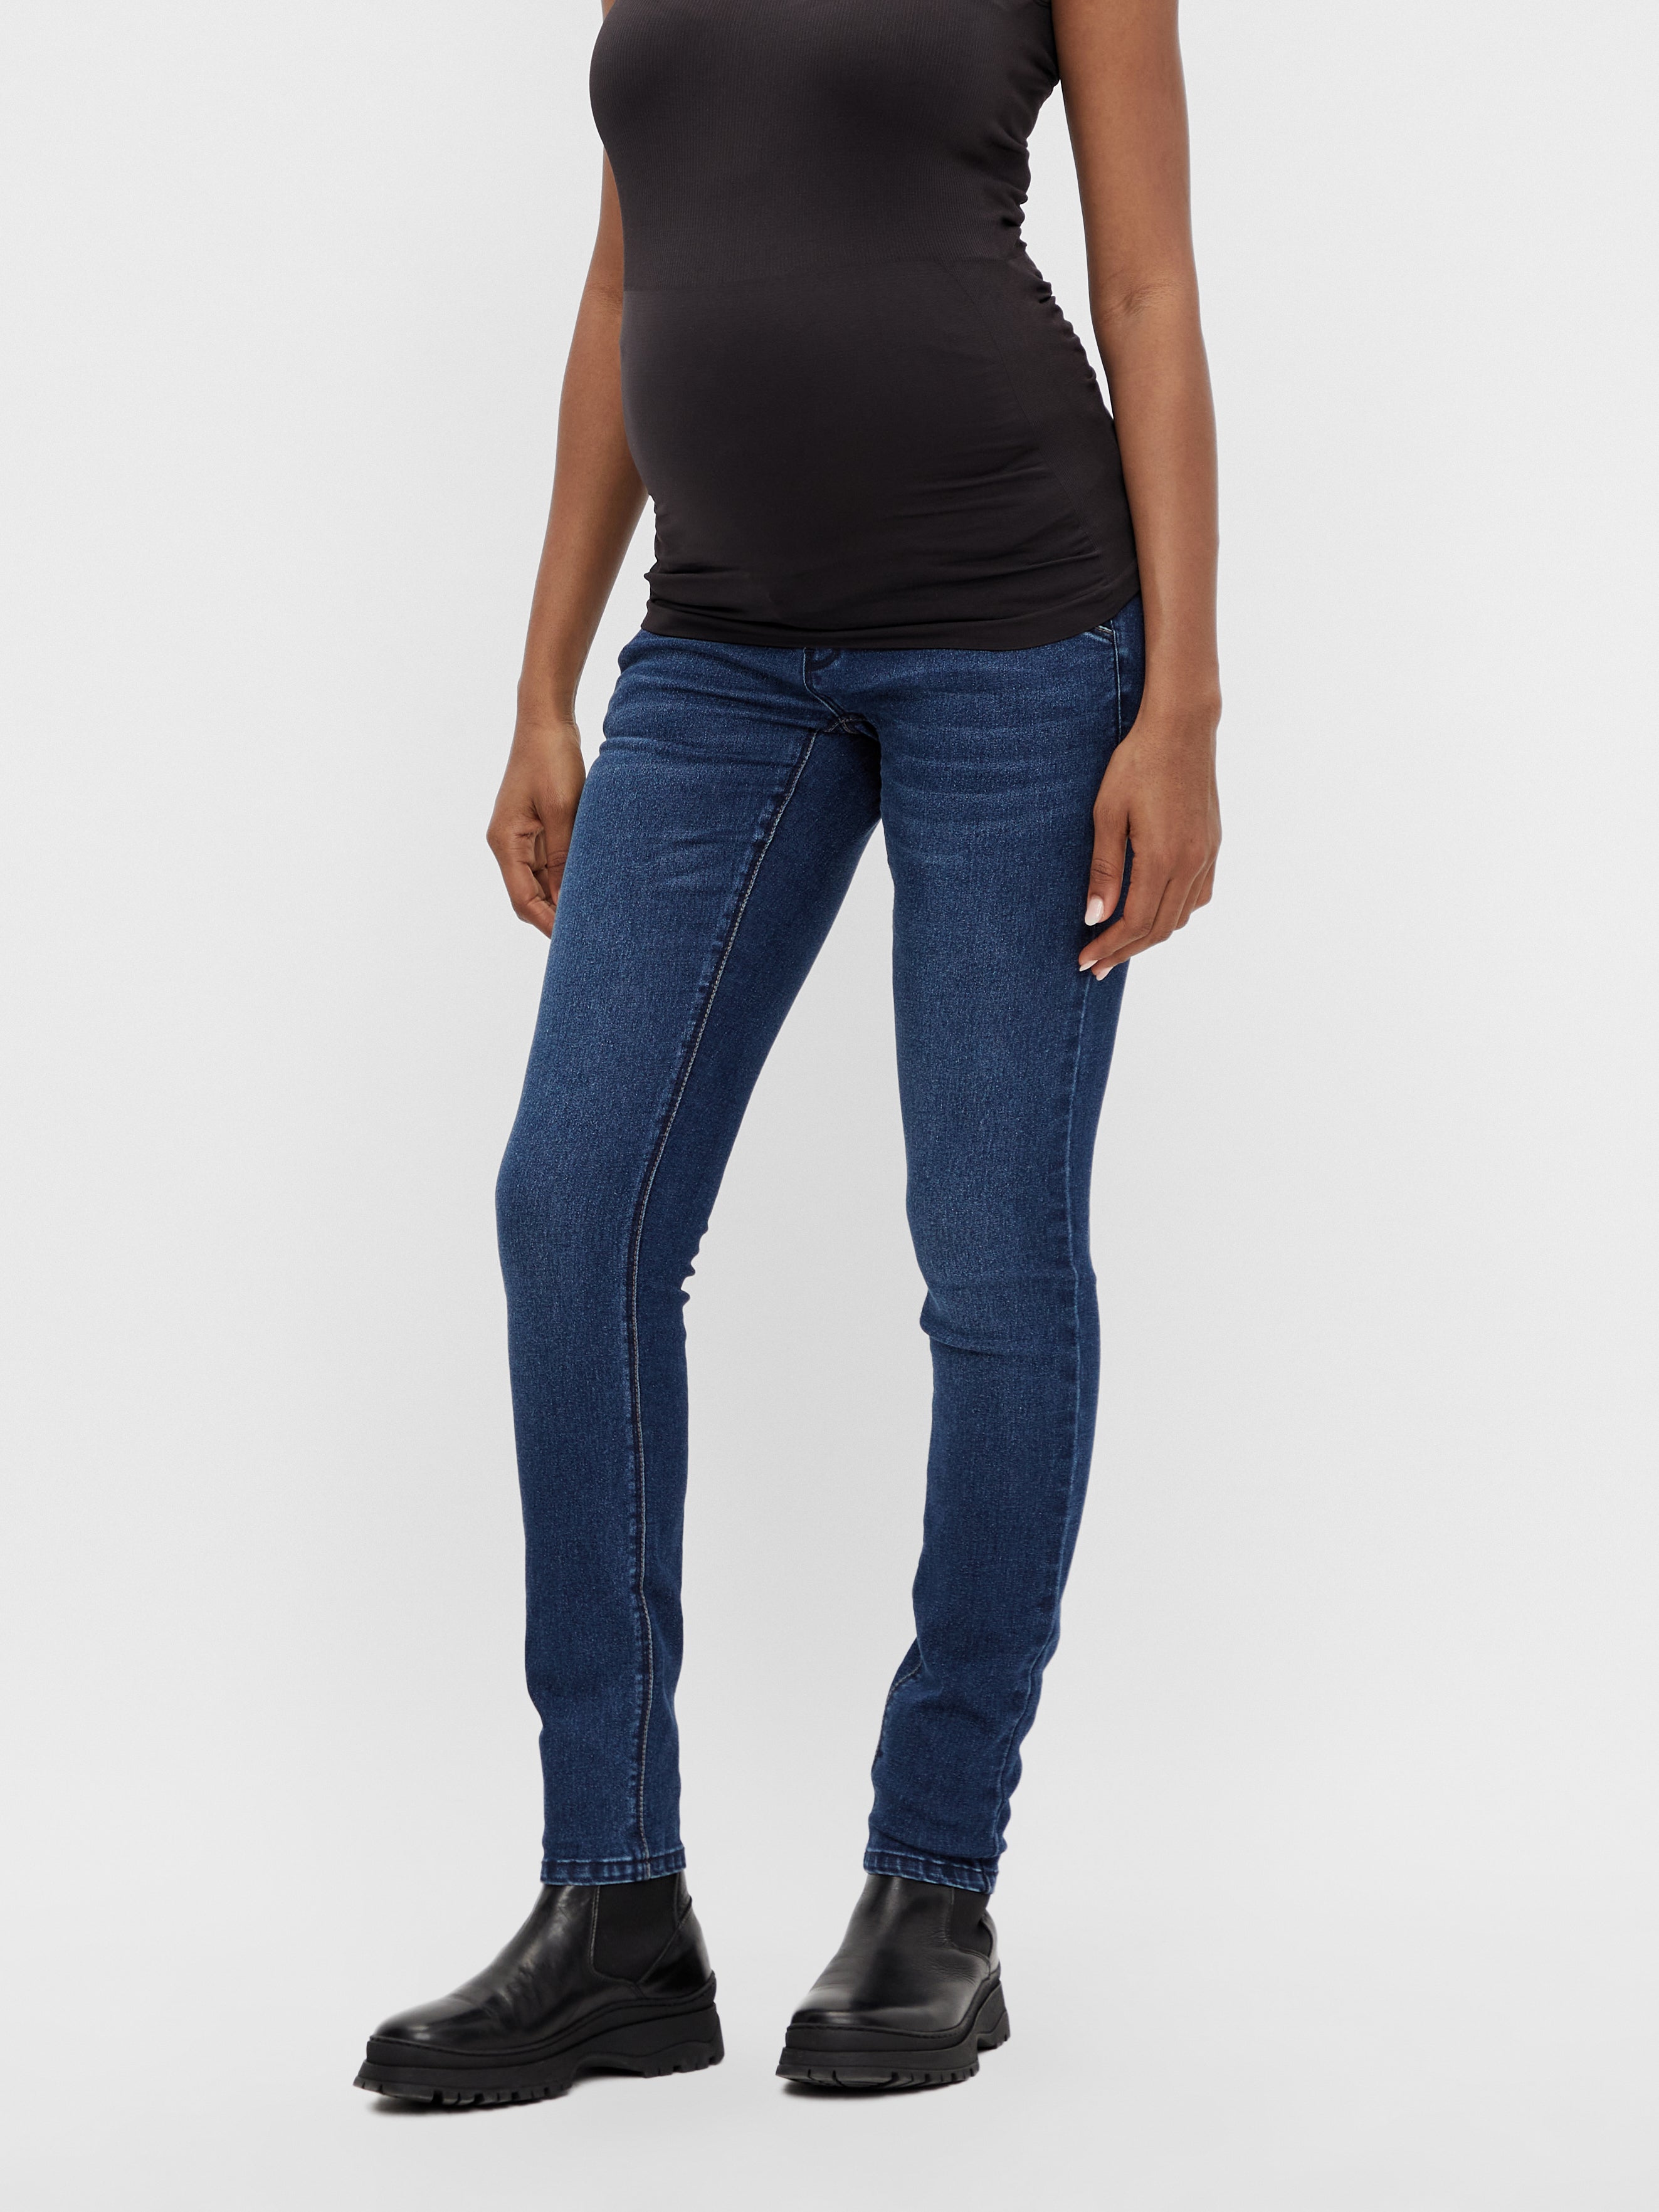 20% Slim Jeans Fit with discount!